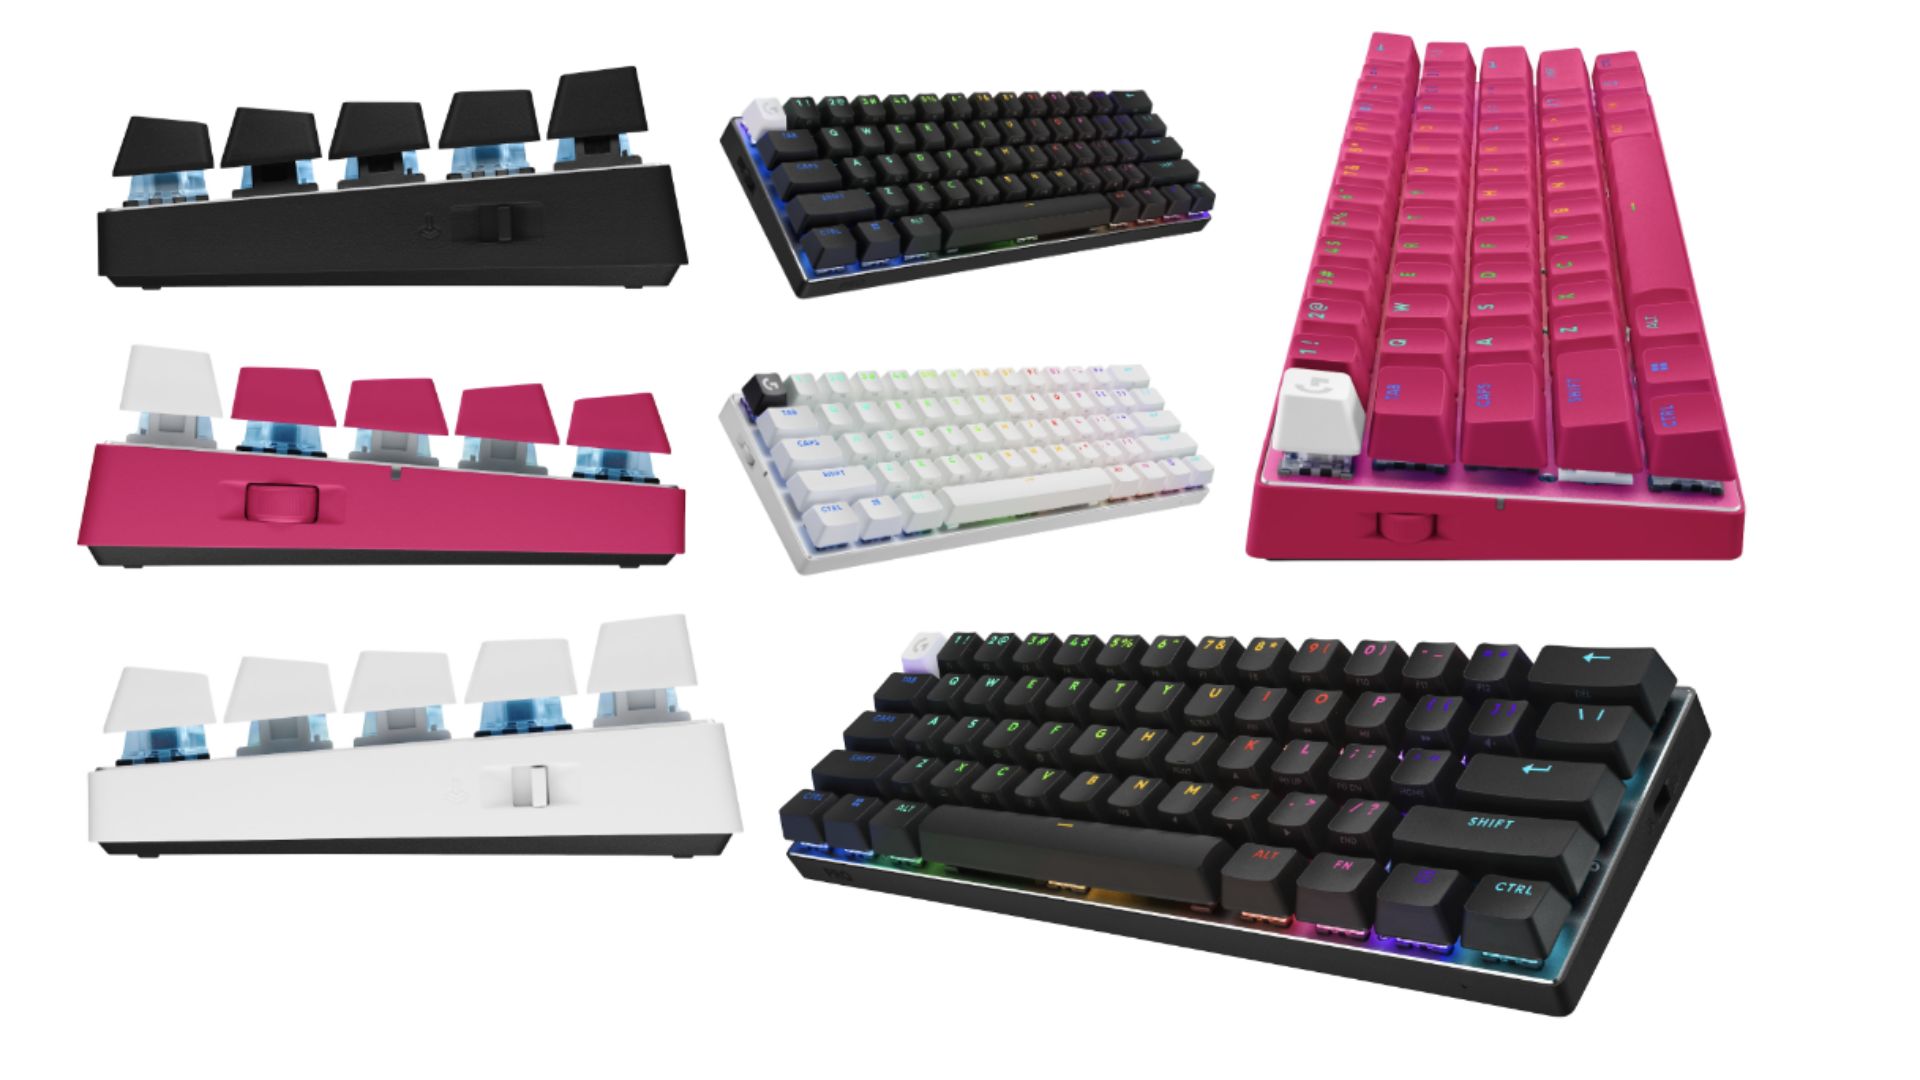 The different PRO X 60 keyboard colors